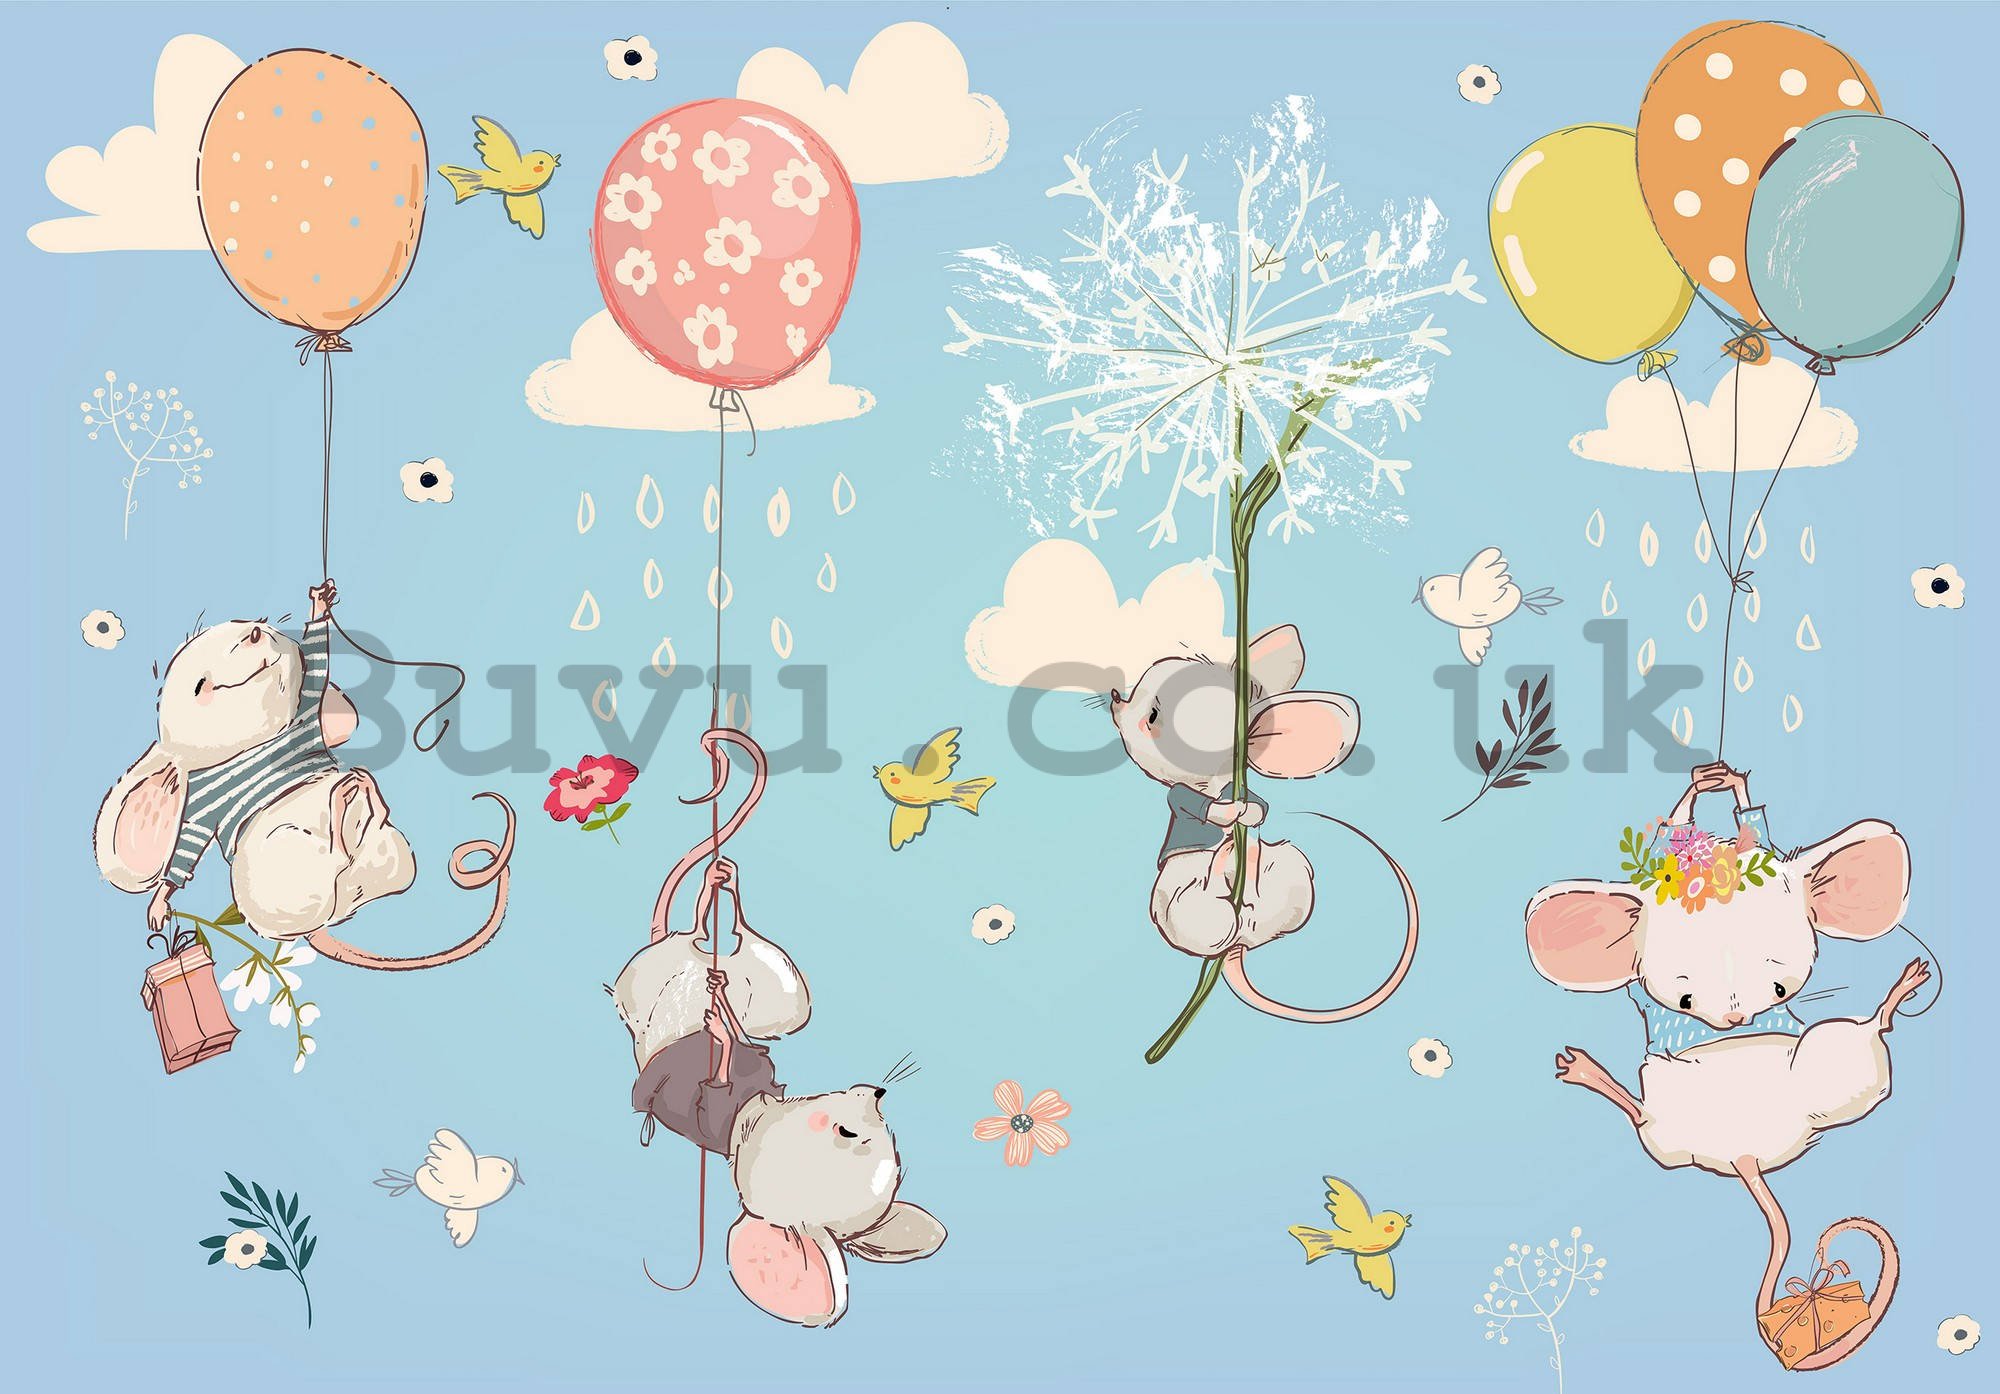 Wall mural vlies: Little mice in the clouds - 416x254 cm